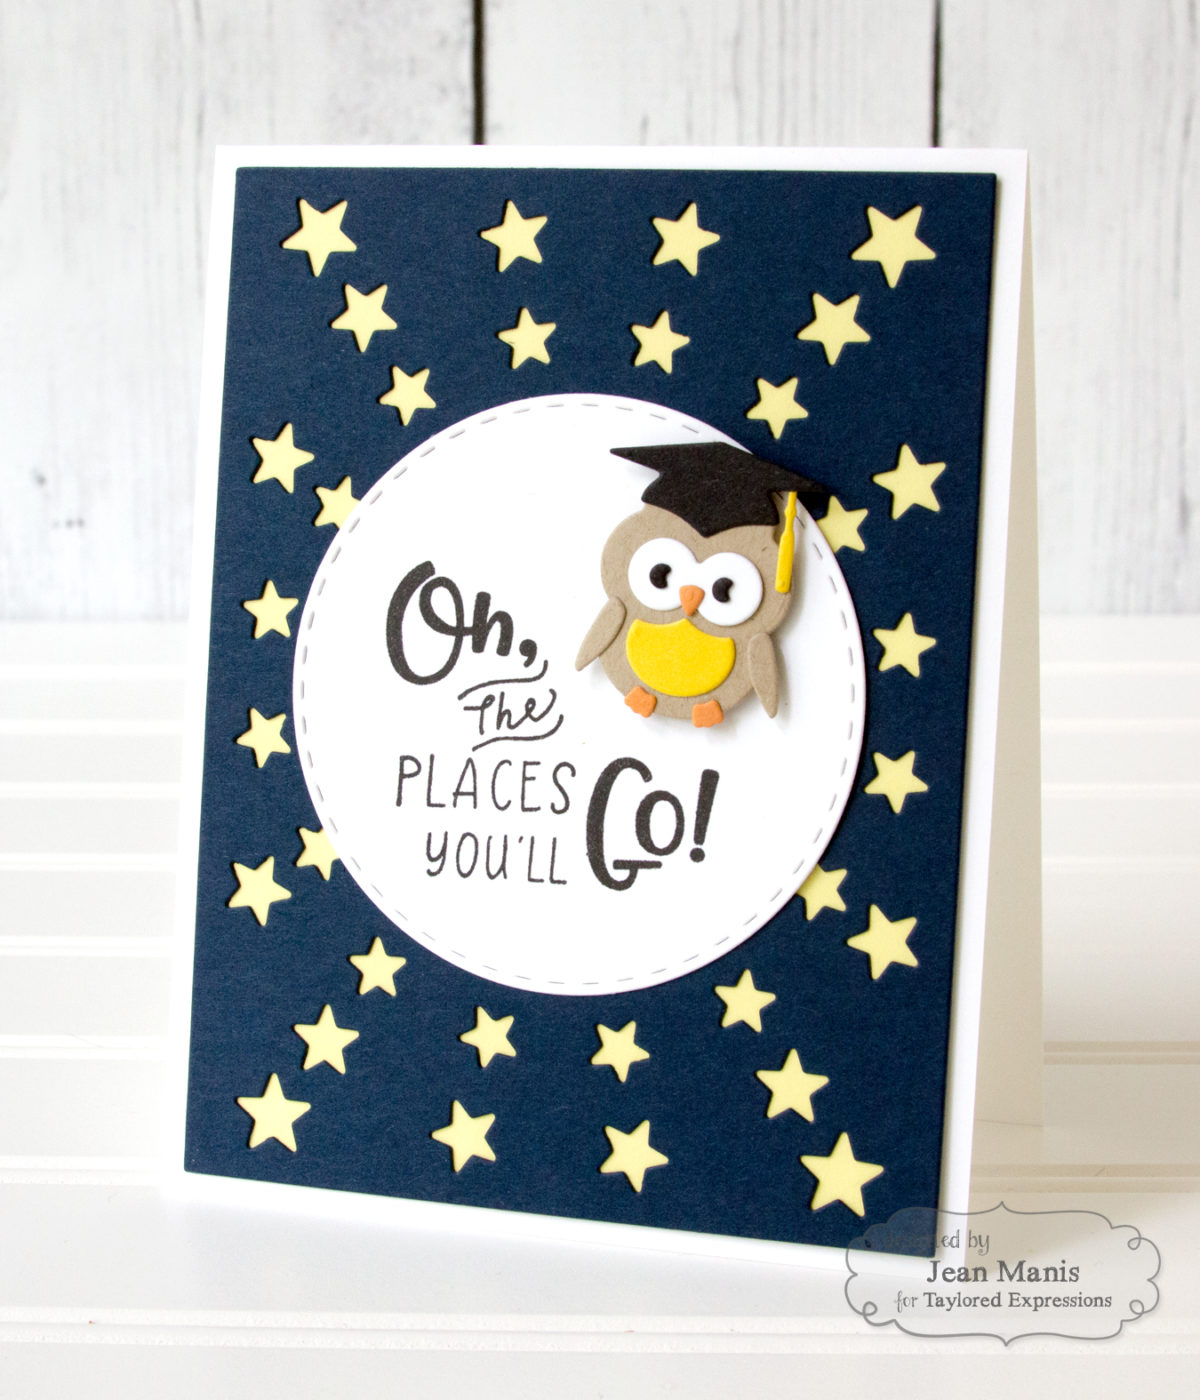 Taylored Expressions – Graduation Card